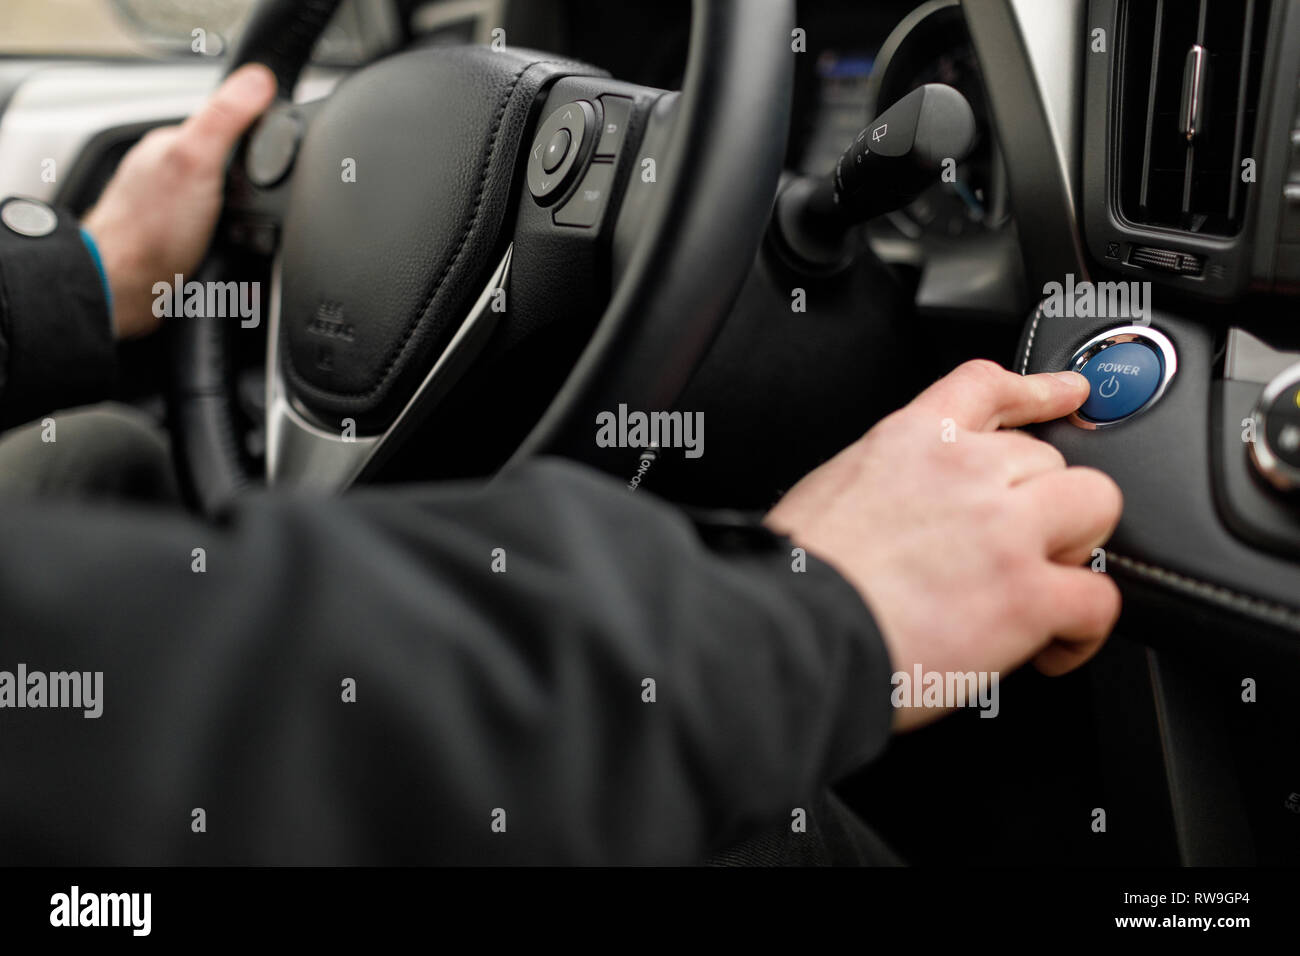 driver pushing car engine start-stop button in modern car. Stock Photo